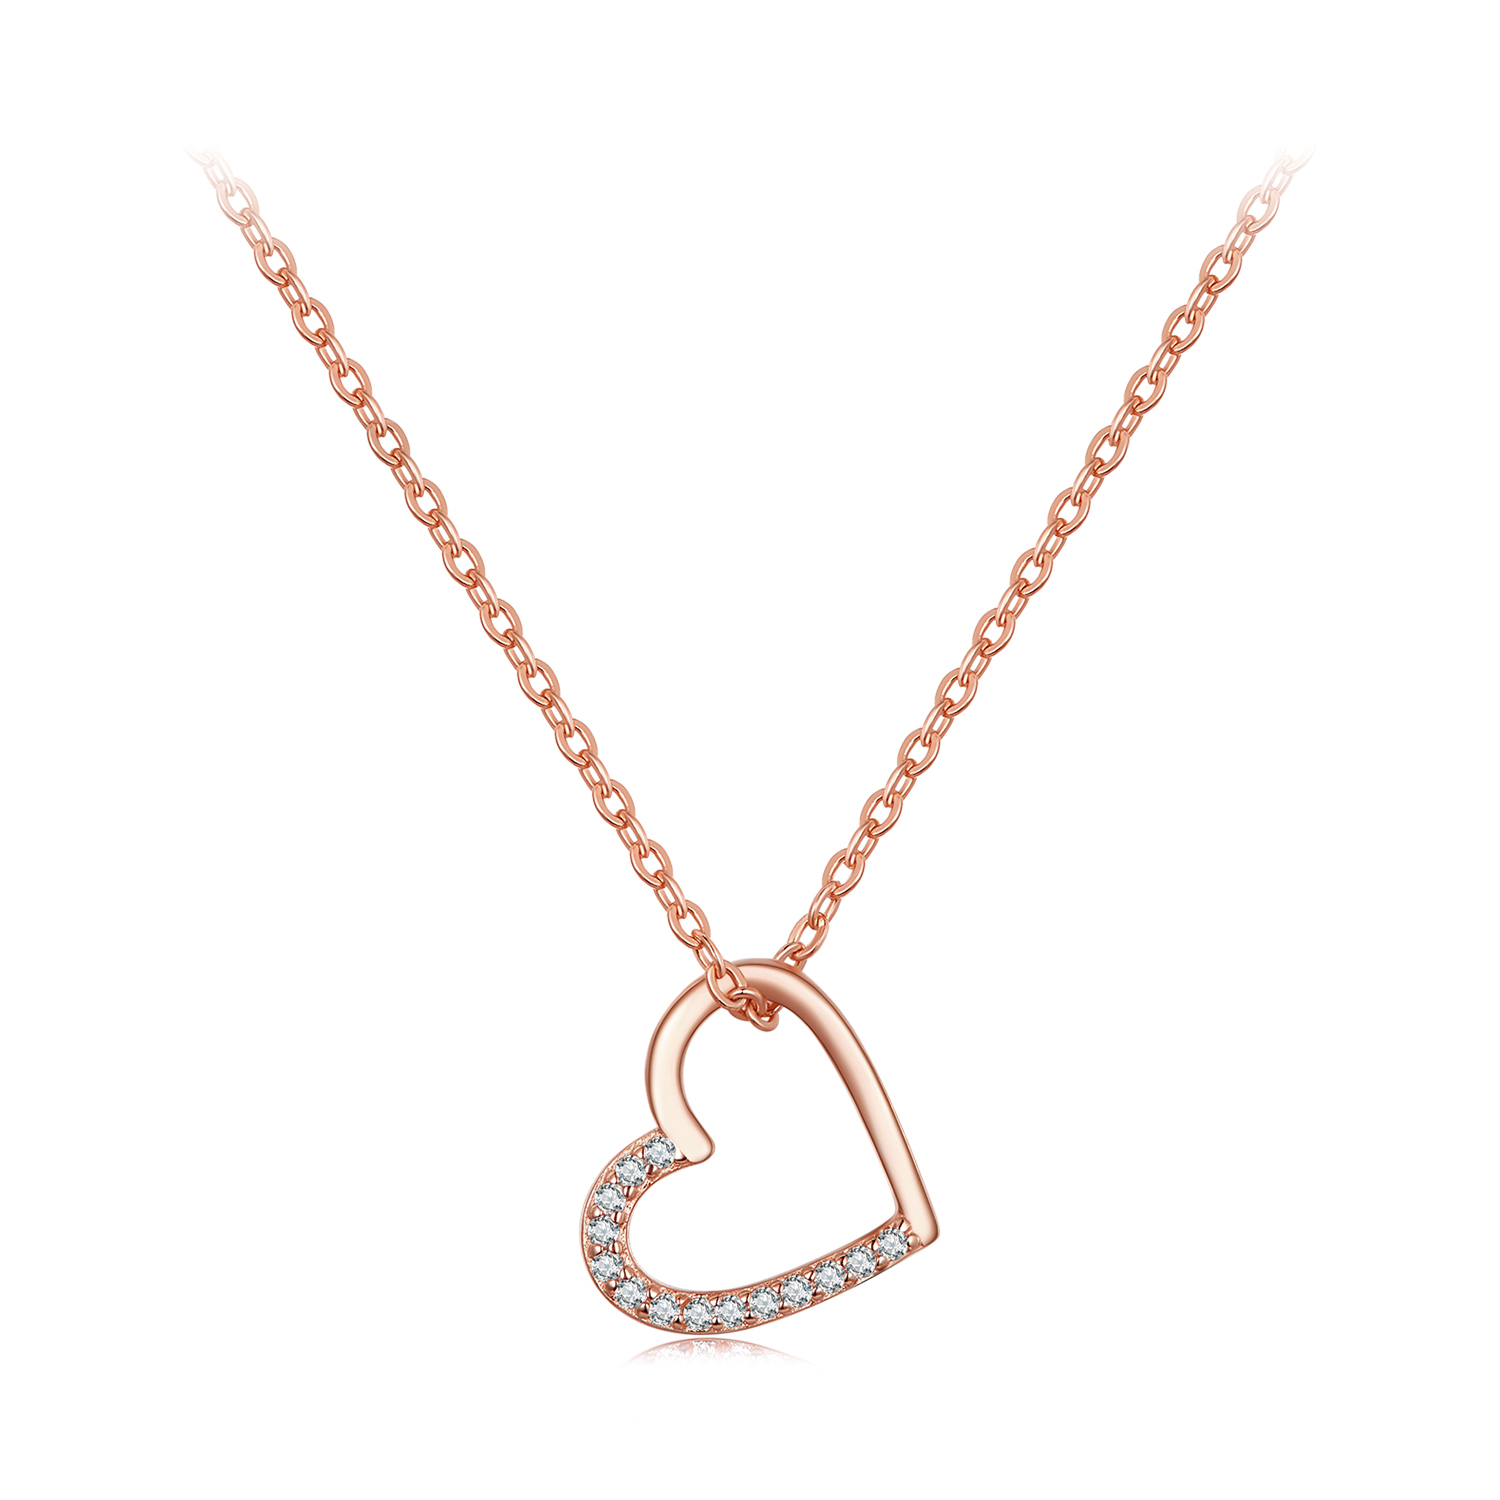 pandora style necklace adorned with a delicate rose gold heart pendant scn347 c